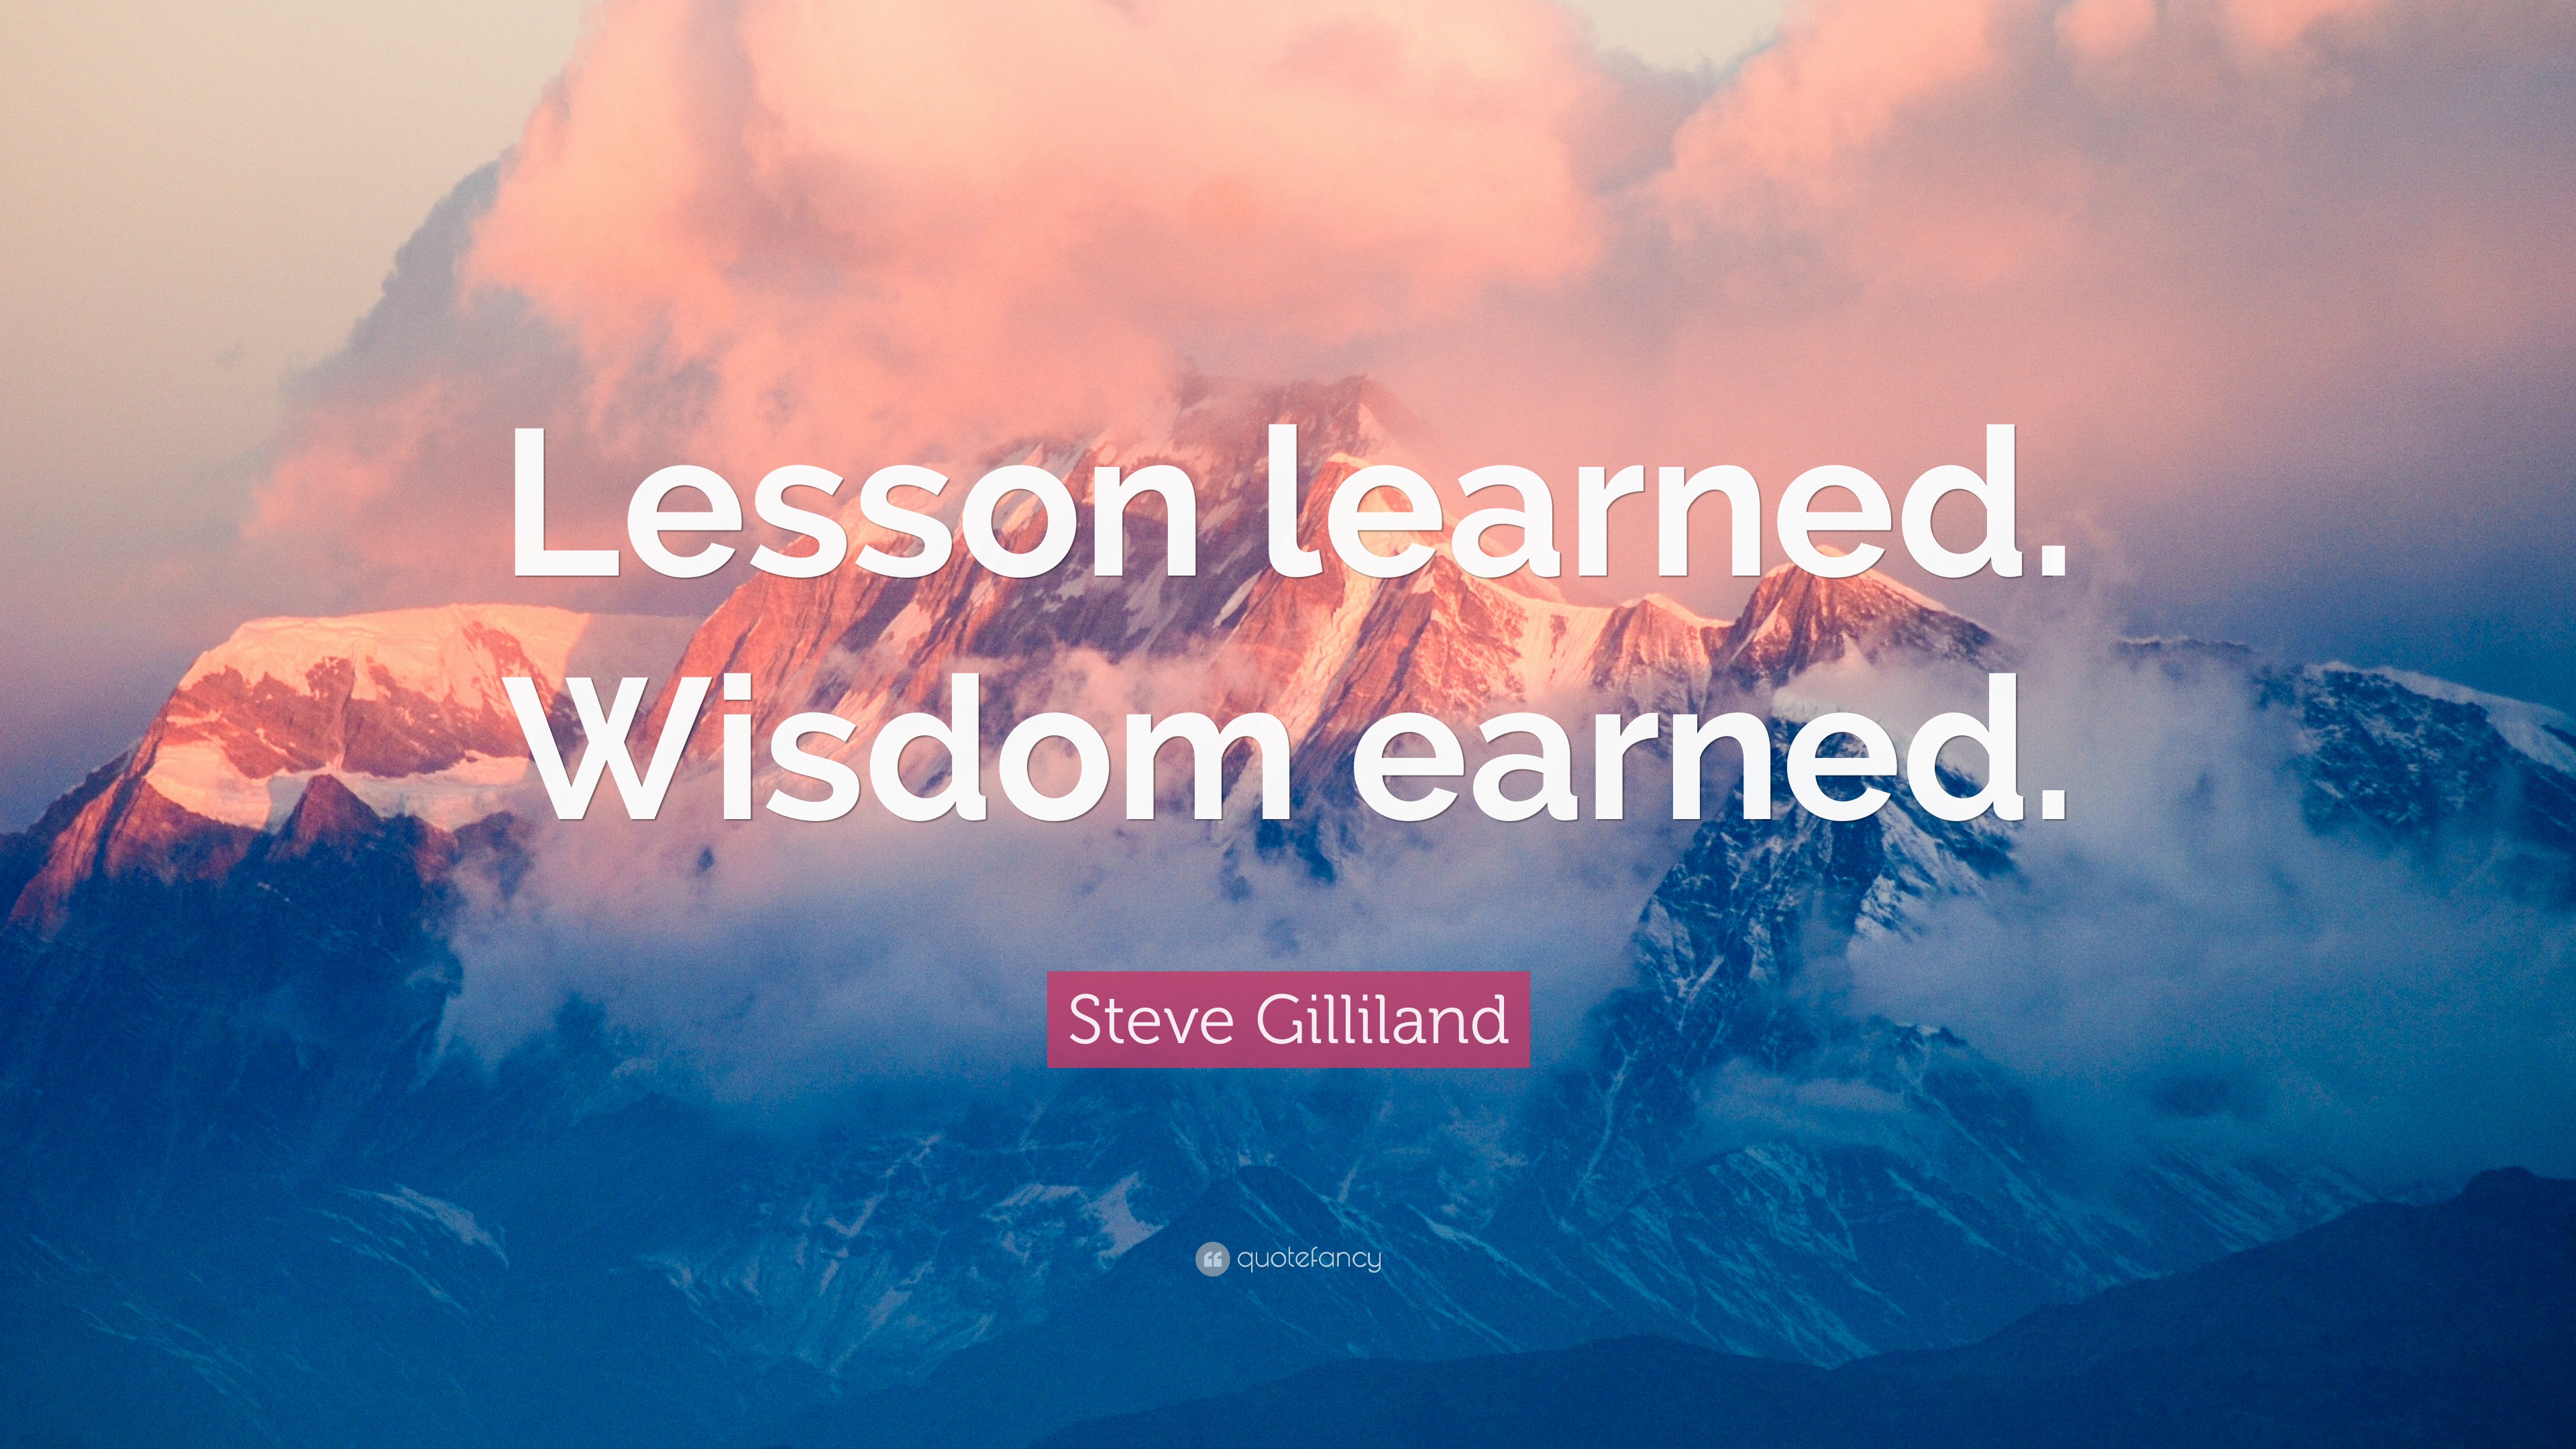 The lessons I learned about lessons learned